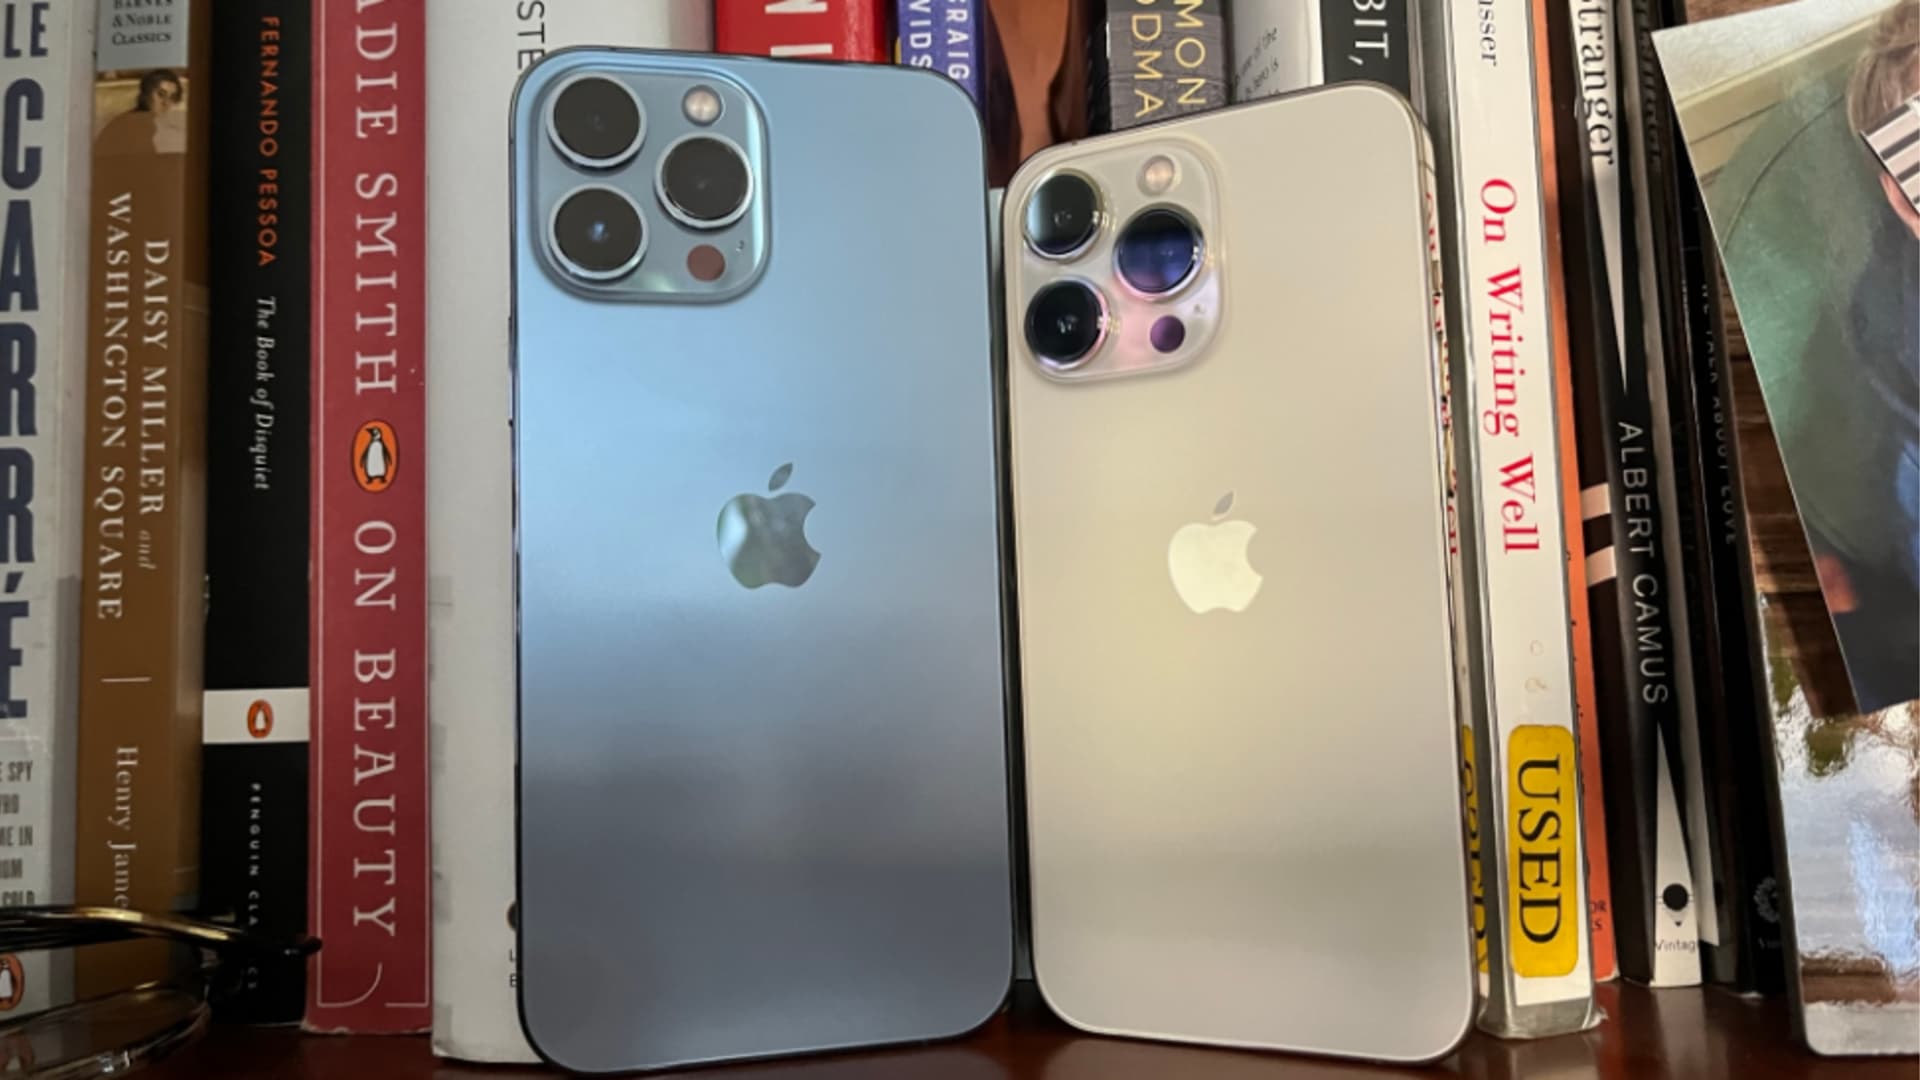 Apple iPhone 13 Pro Max and iPhone 13 Pro